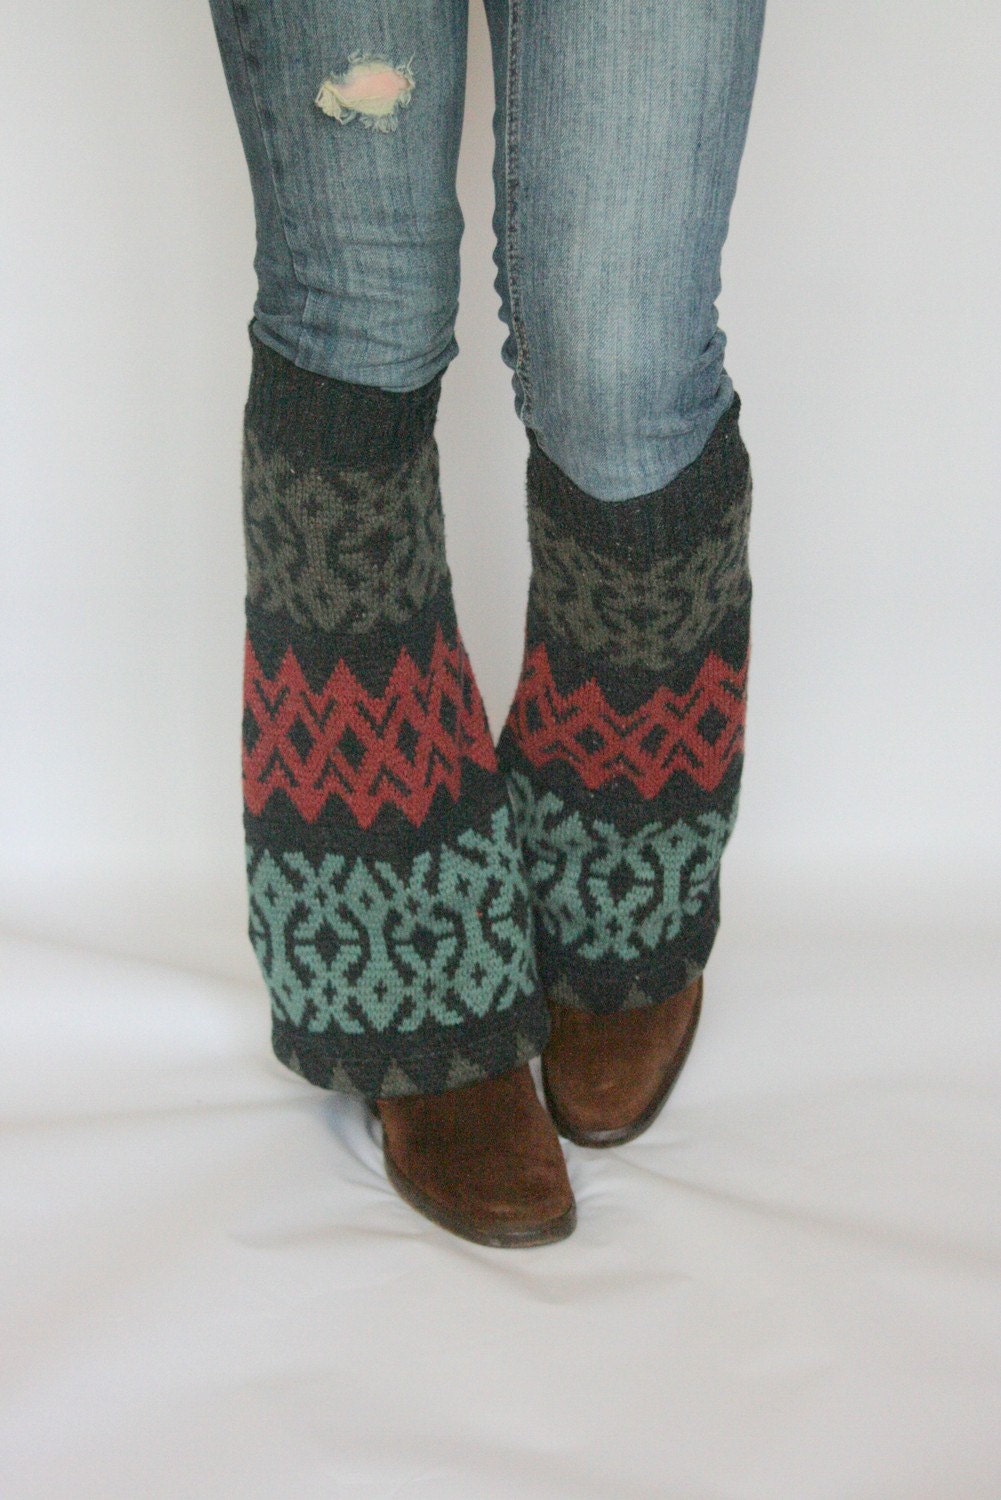 Upcycled Recycled Repurposed Sweater Leg Warmers Ikat Charcoal Teal Taupe Ruby